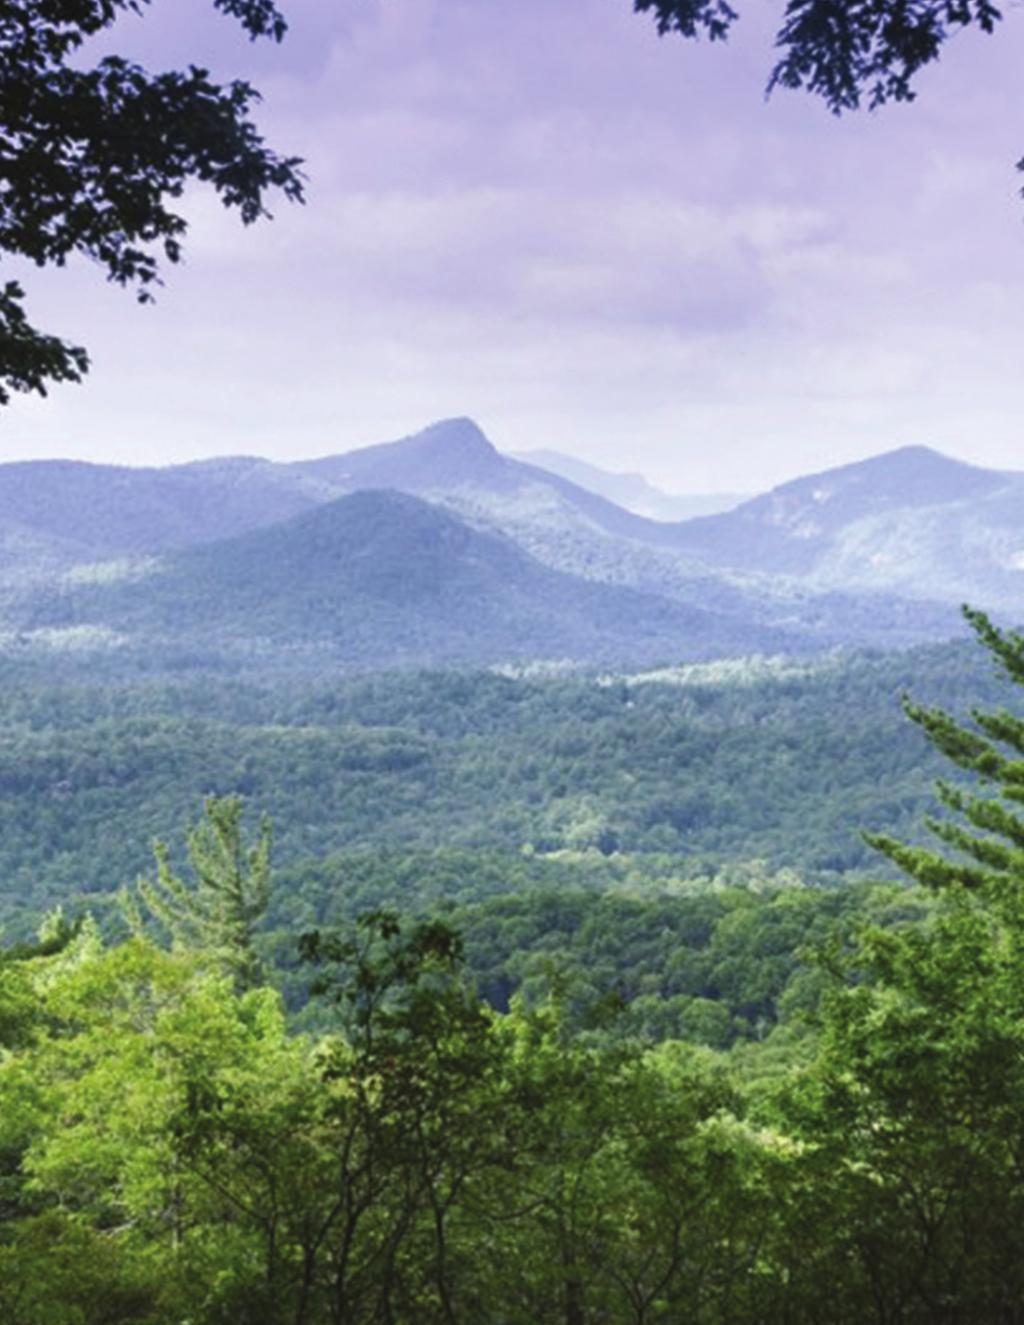 Mark your Calendar now for the 2015 FLABOTA Retreat and Board of Directors Meeting In beautiful Cashiers, North